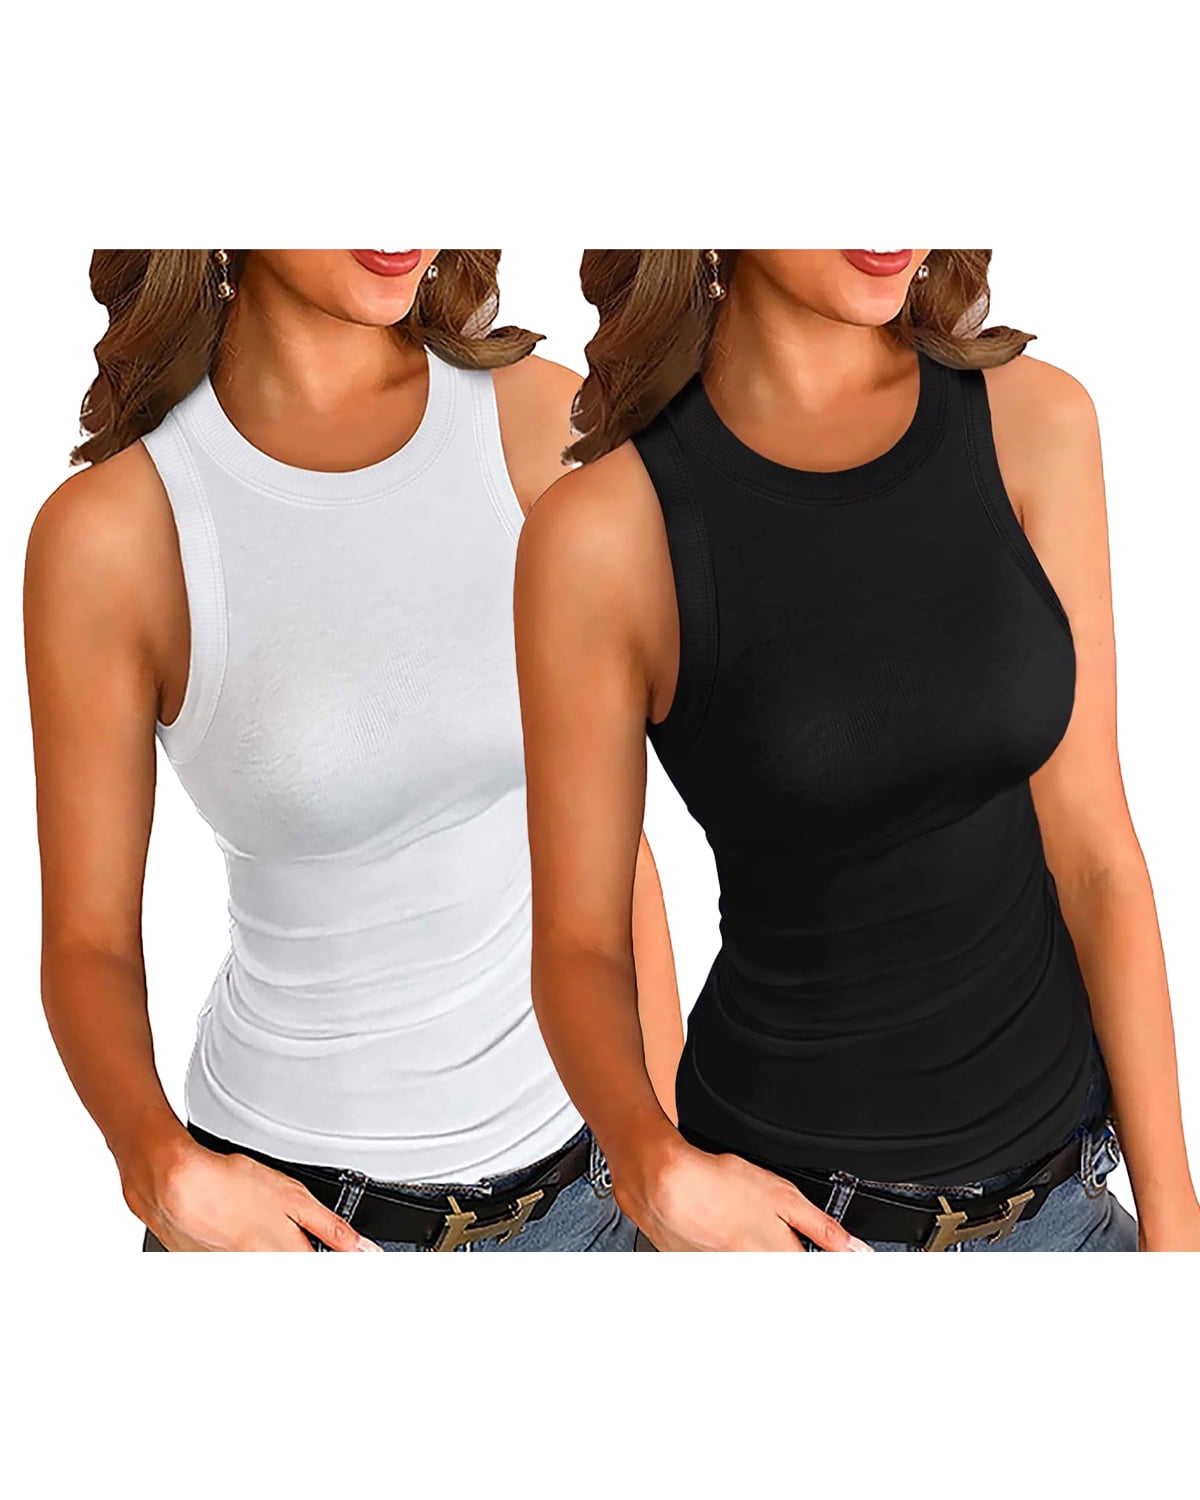 Vafful Womens Tank Tops 2 Pack Summer Top Ribbed Sleeveless Racerback Basic  Top Slim Fitted Round High Neck Sexy Tank Tops for Women Black and White